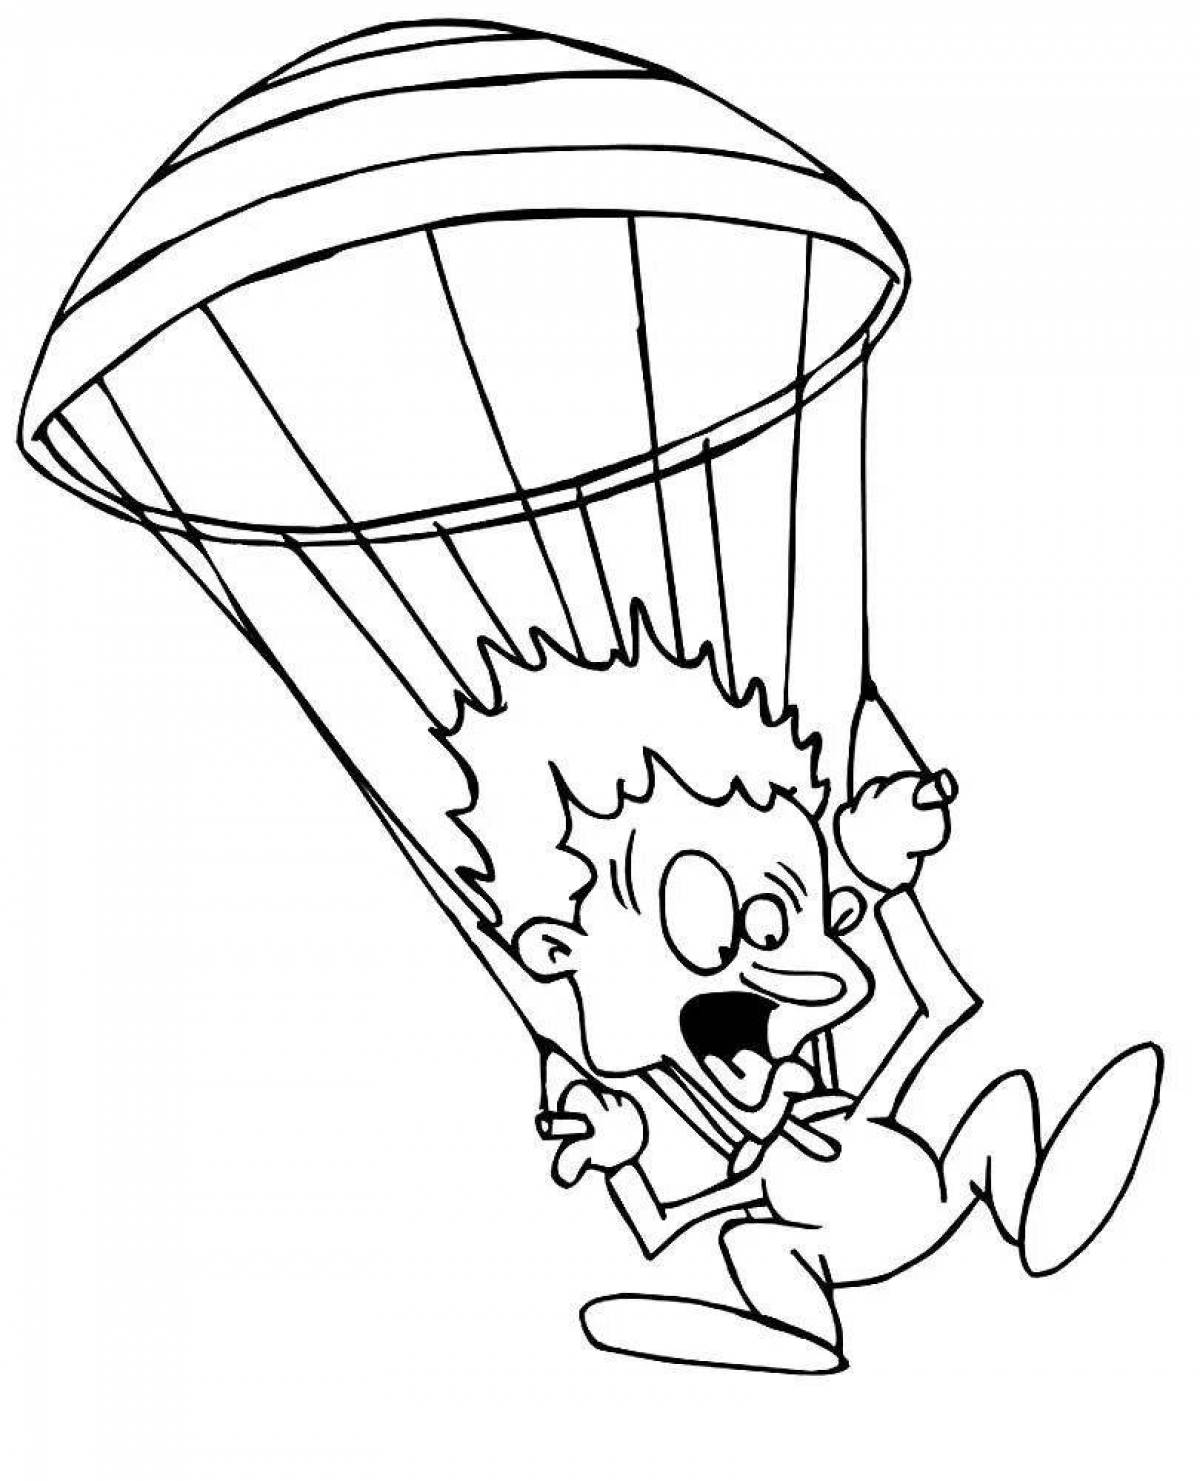 Adorable parachute coloring page for little ones